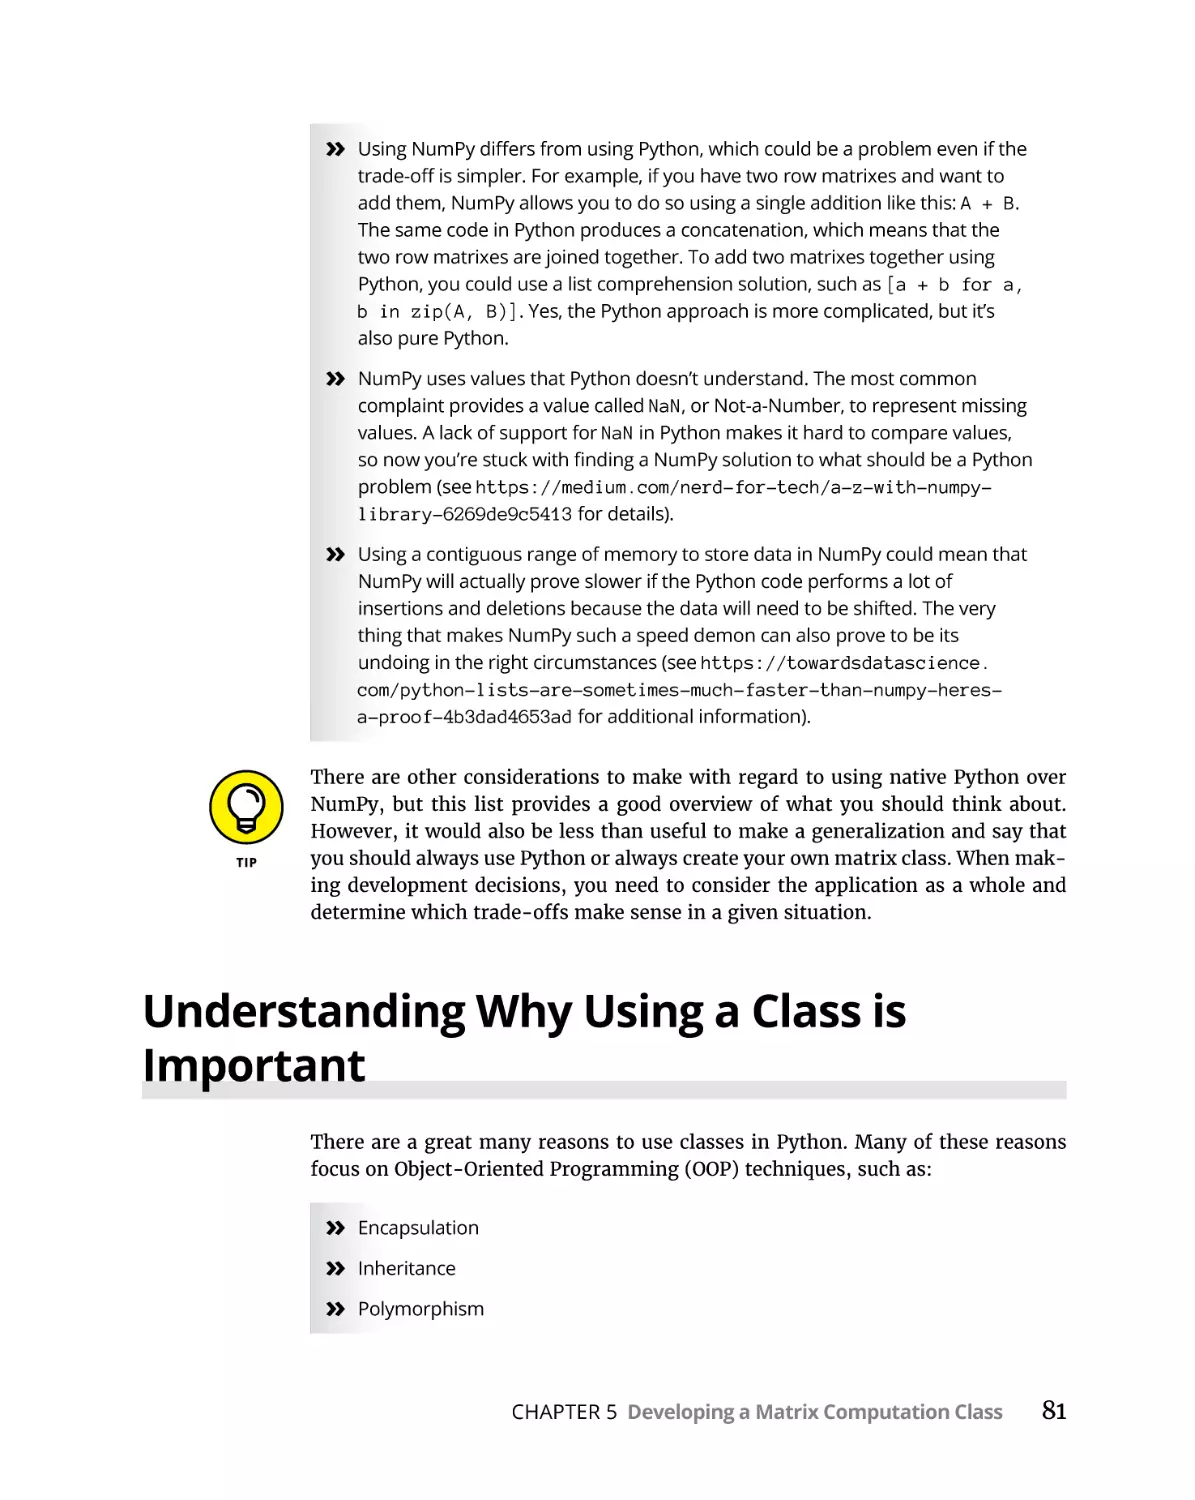 Understanding Why Using a Class is Important